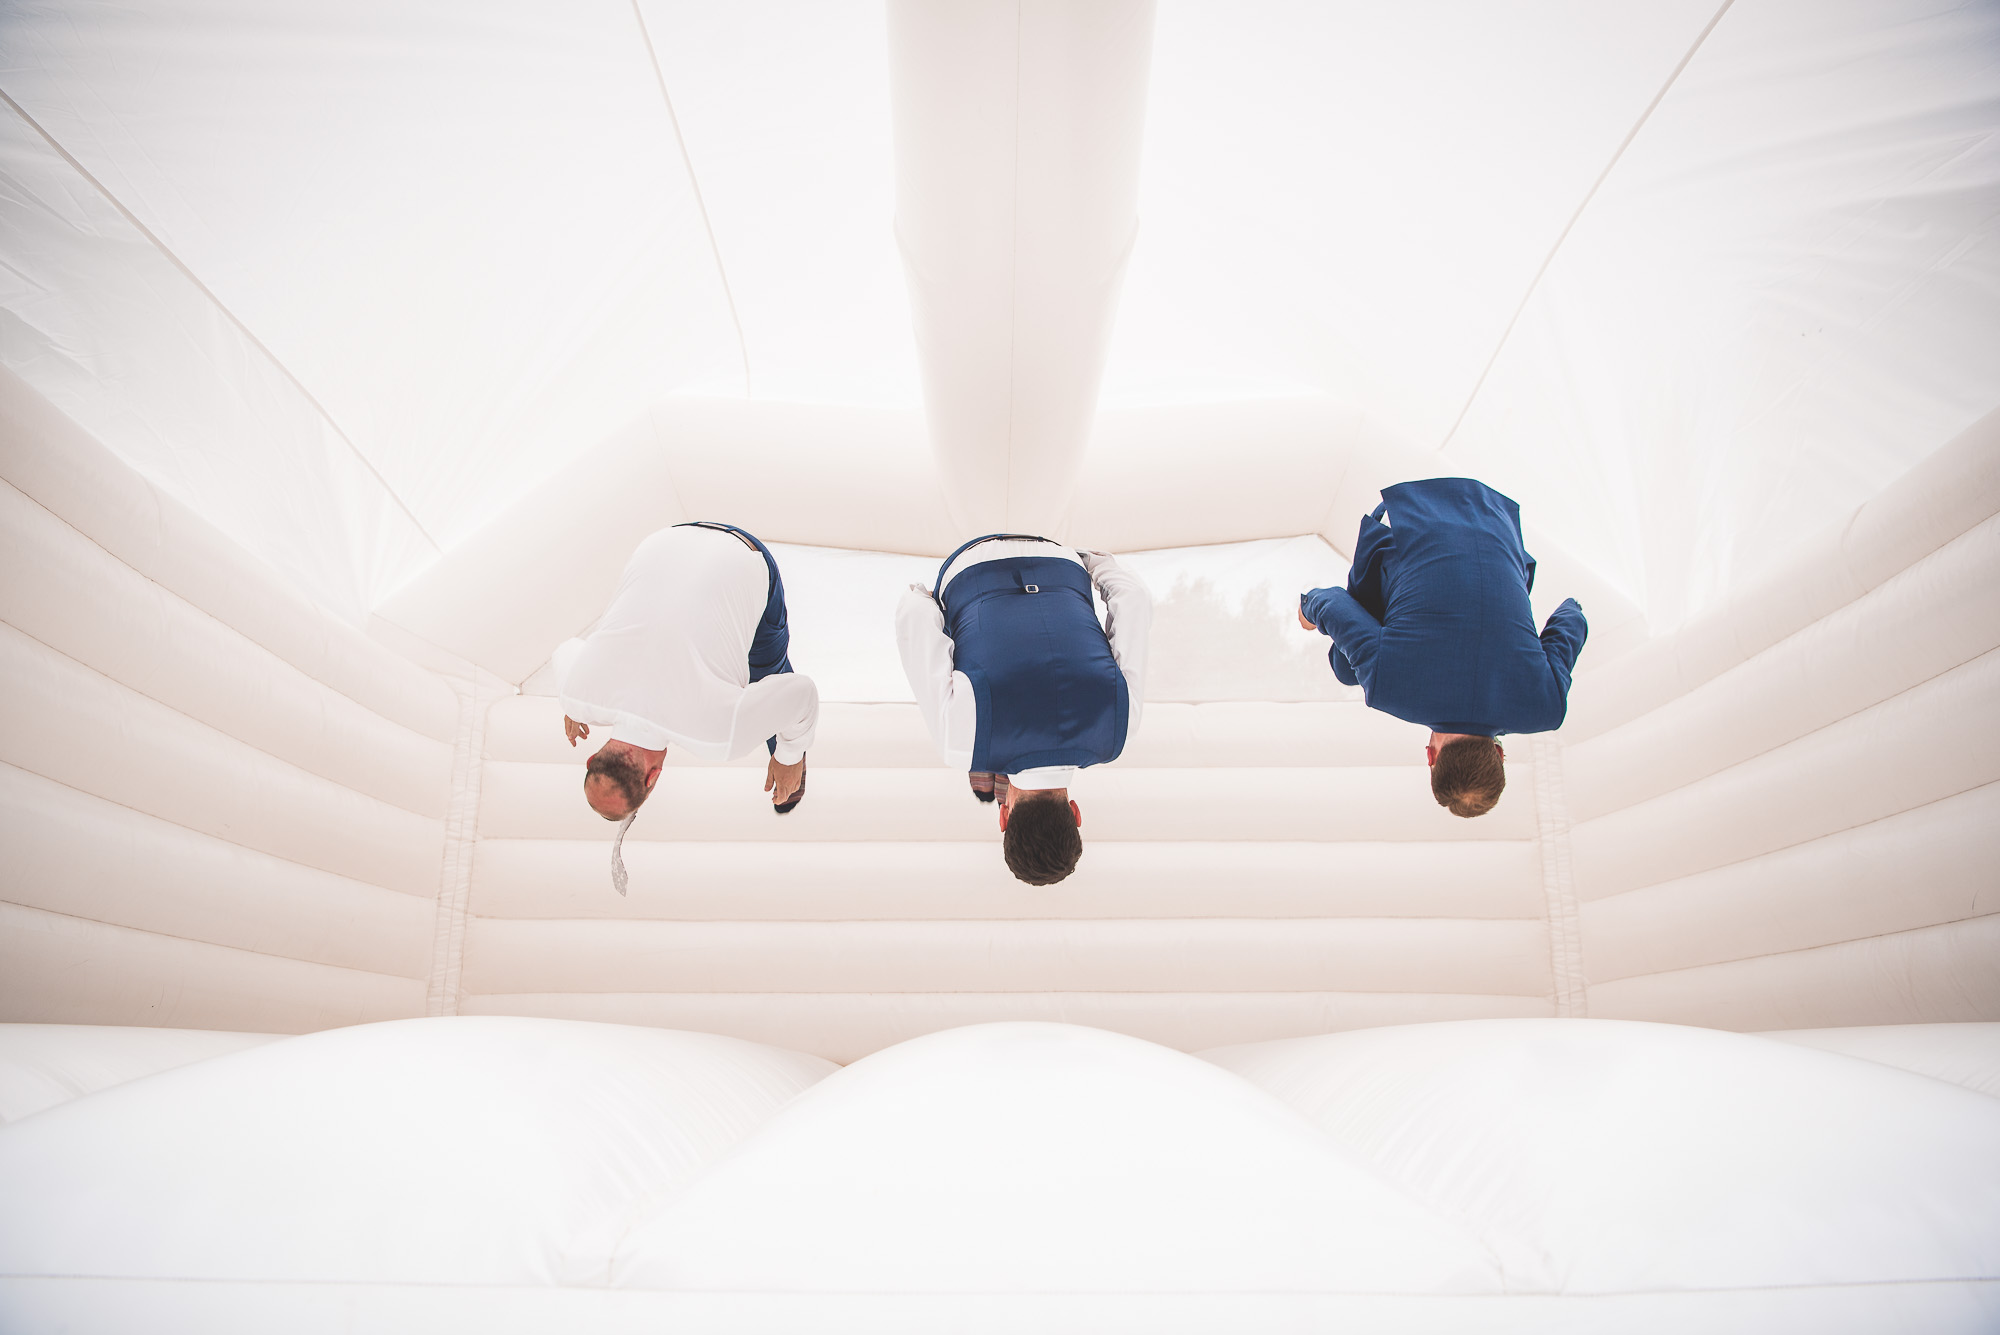 A group of groomsmen in suits posing on top of a white inflatable for their wedding photographer.